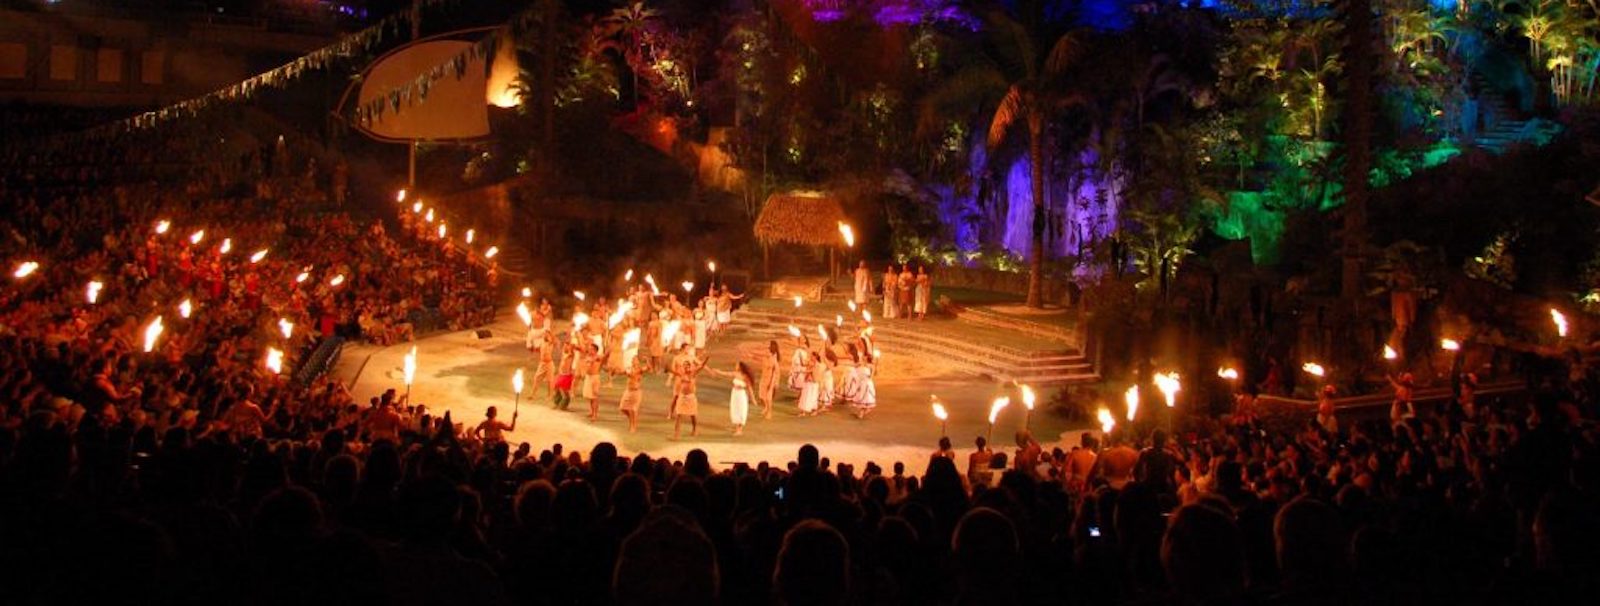 Top 4 Reasons to Book One of Our Polynesian Cultural Center Packages